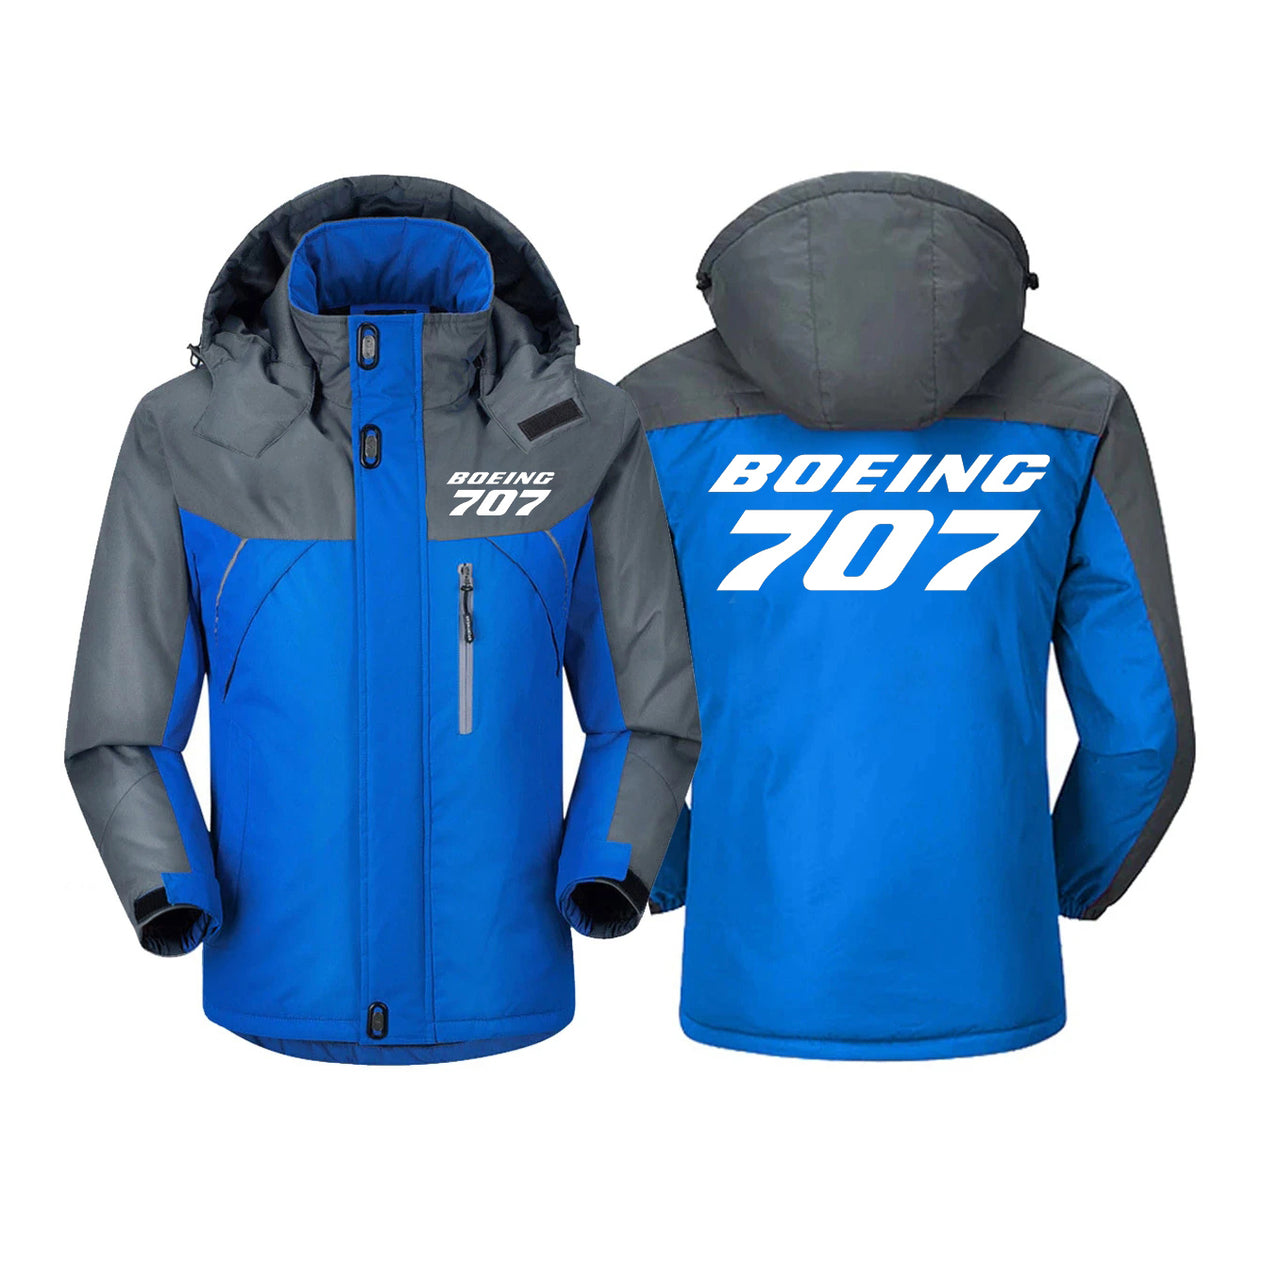 Boeing 707 & Text Designed Thick Winter Jackets